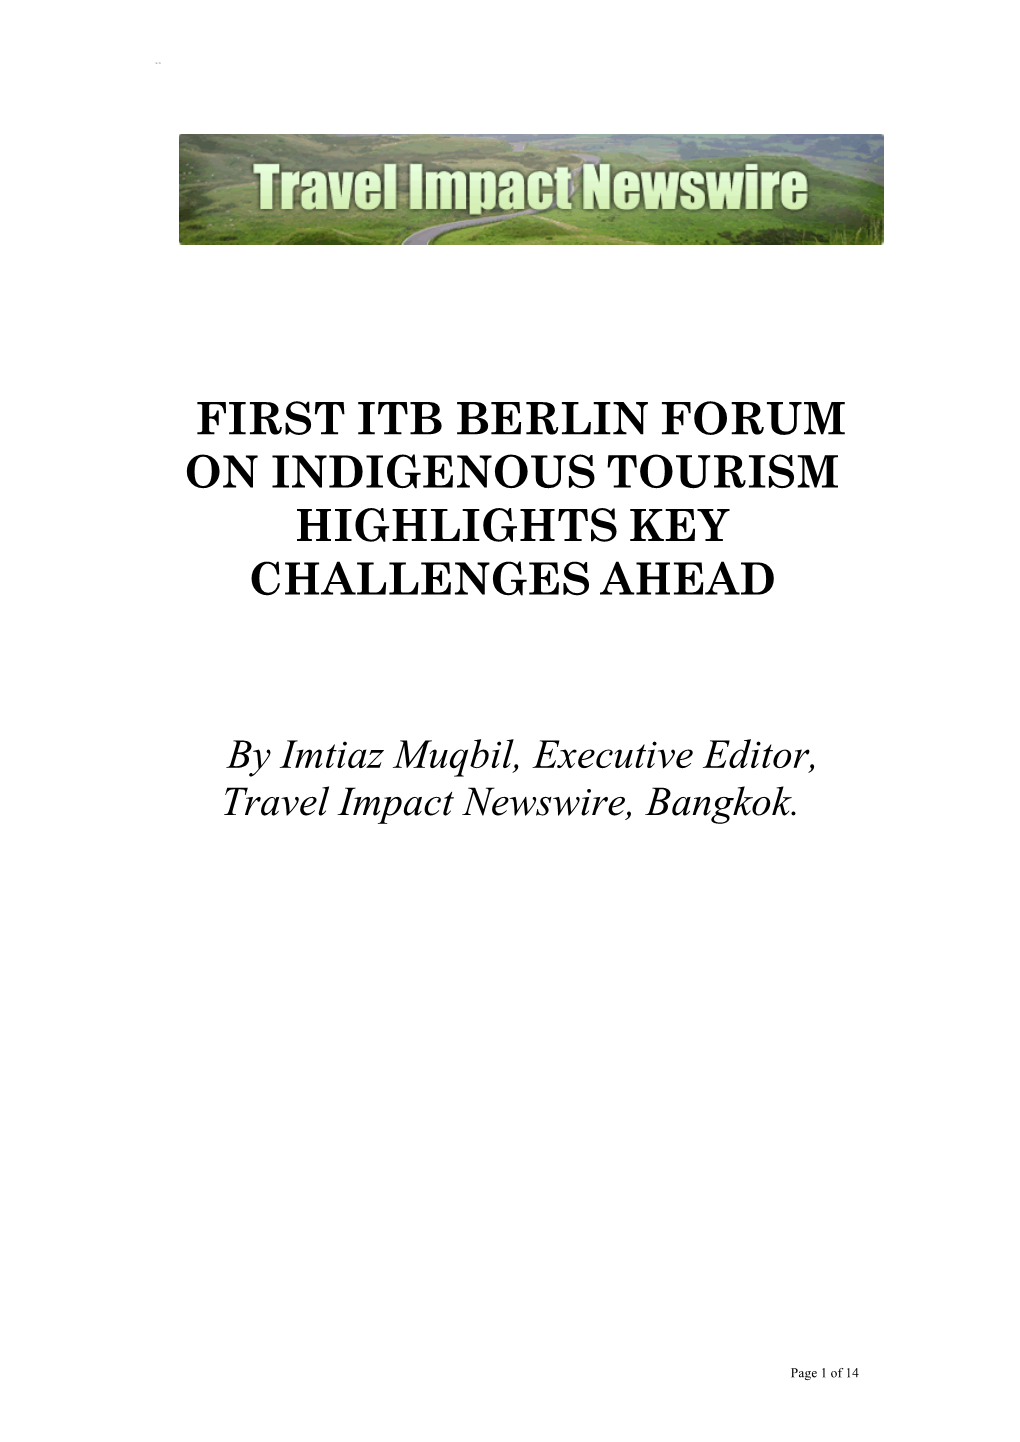 First Itb Berlin Forum on Indigenous Tourism Highlights Key Challenges Ahead